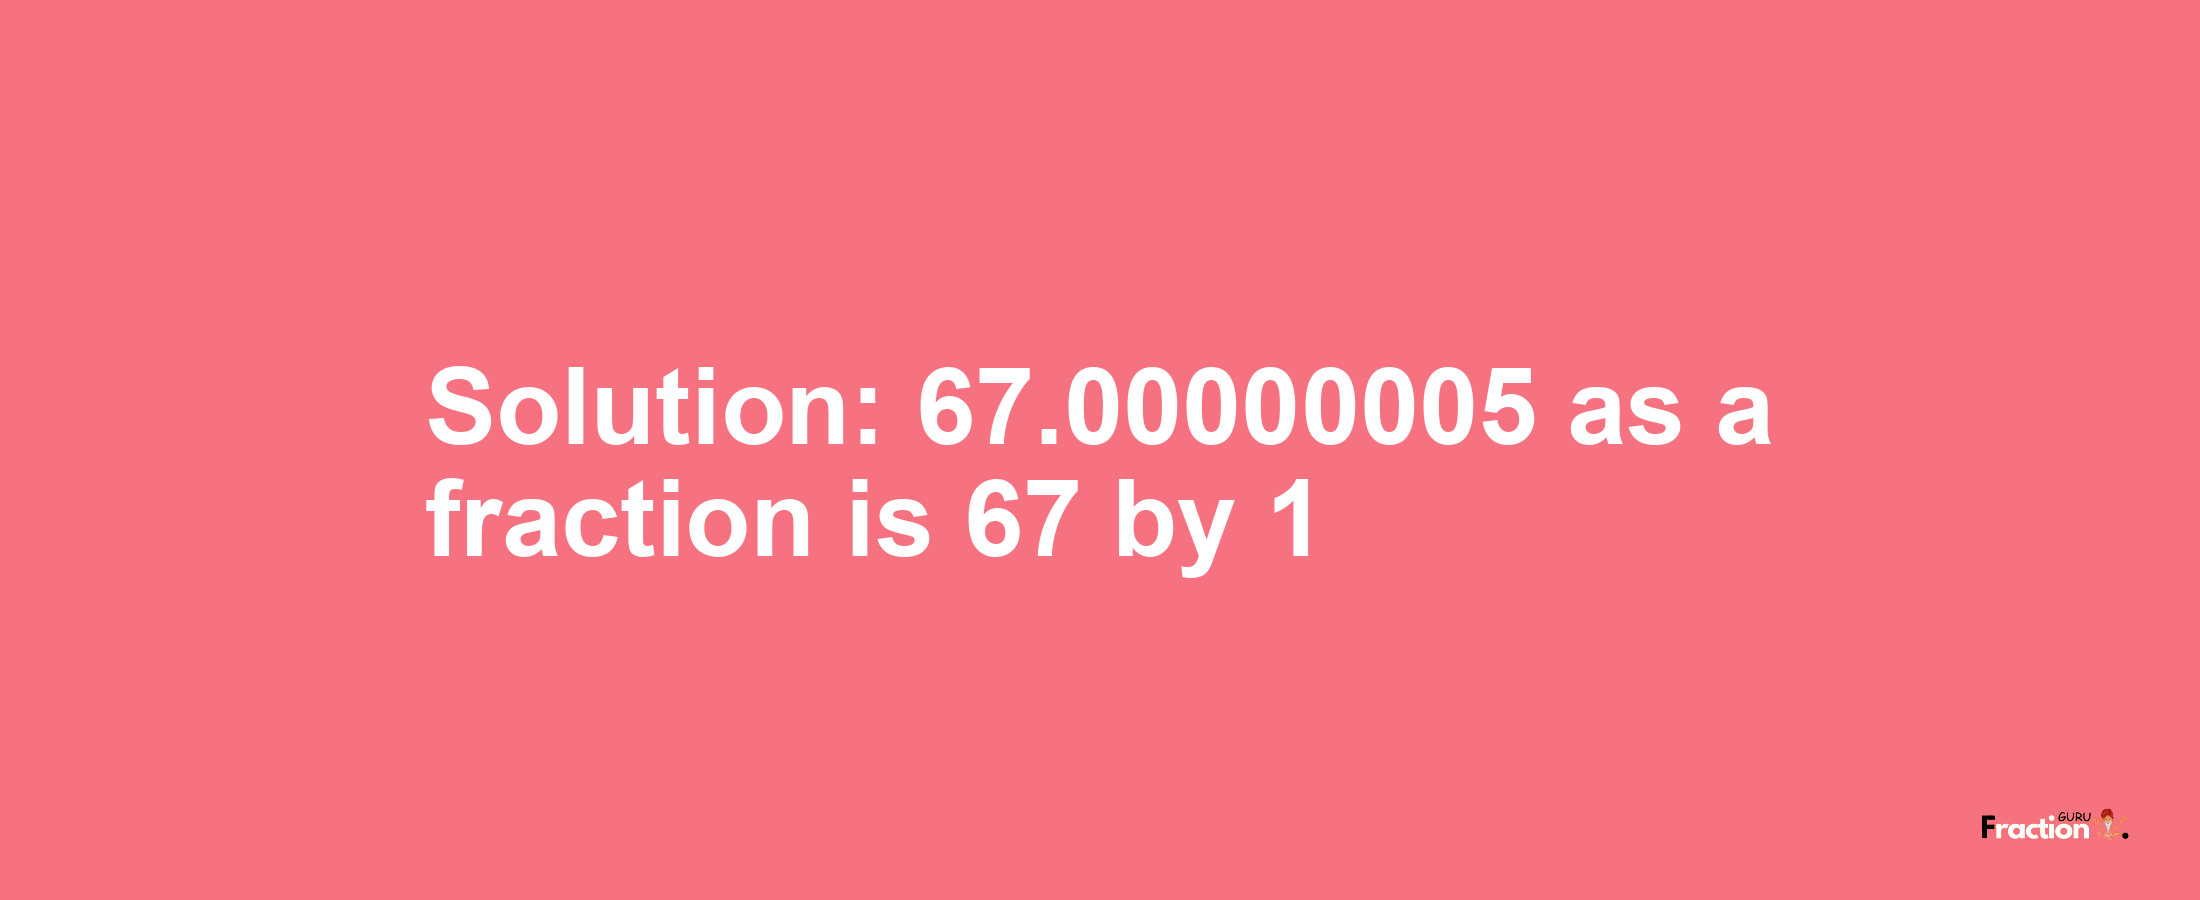 Solution:67.00000005 as a fraction is 67/1